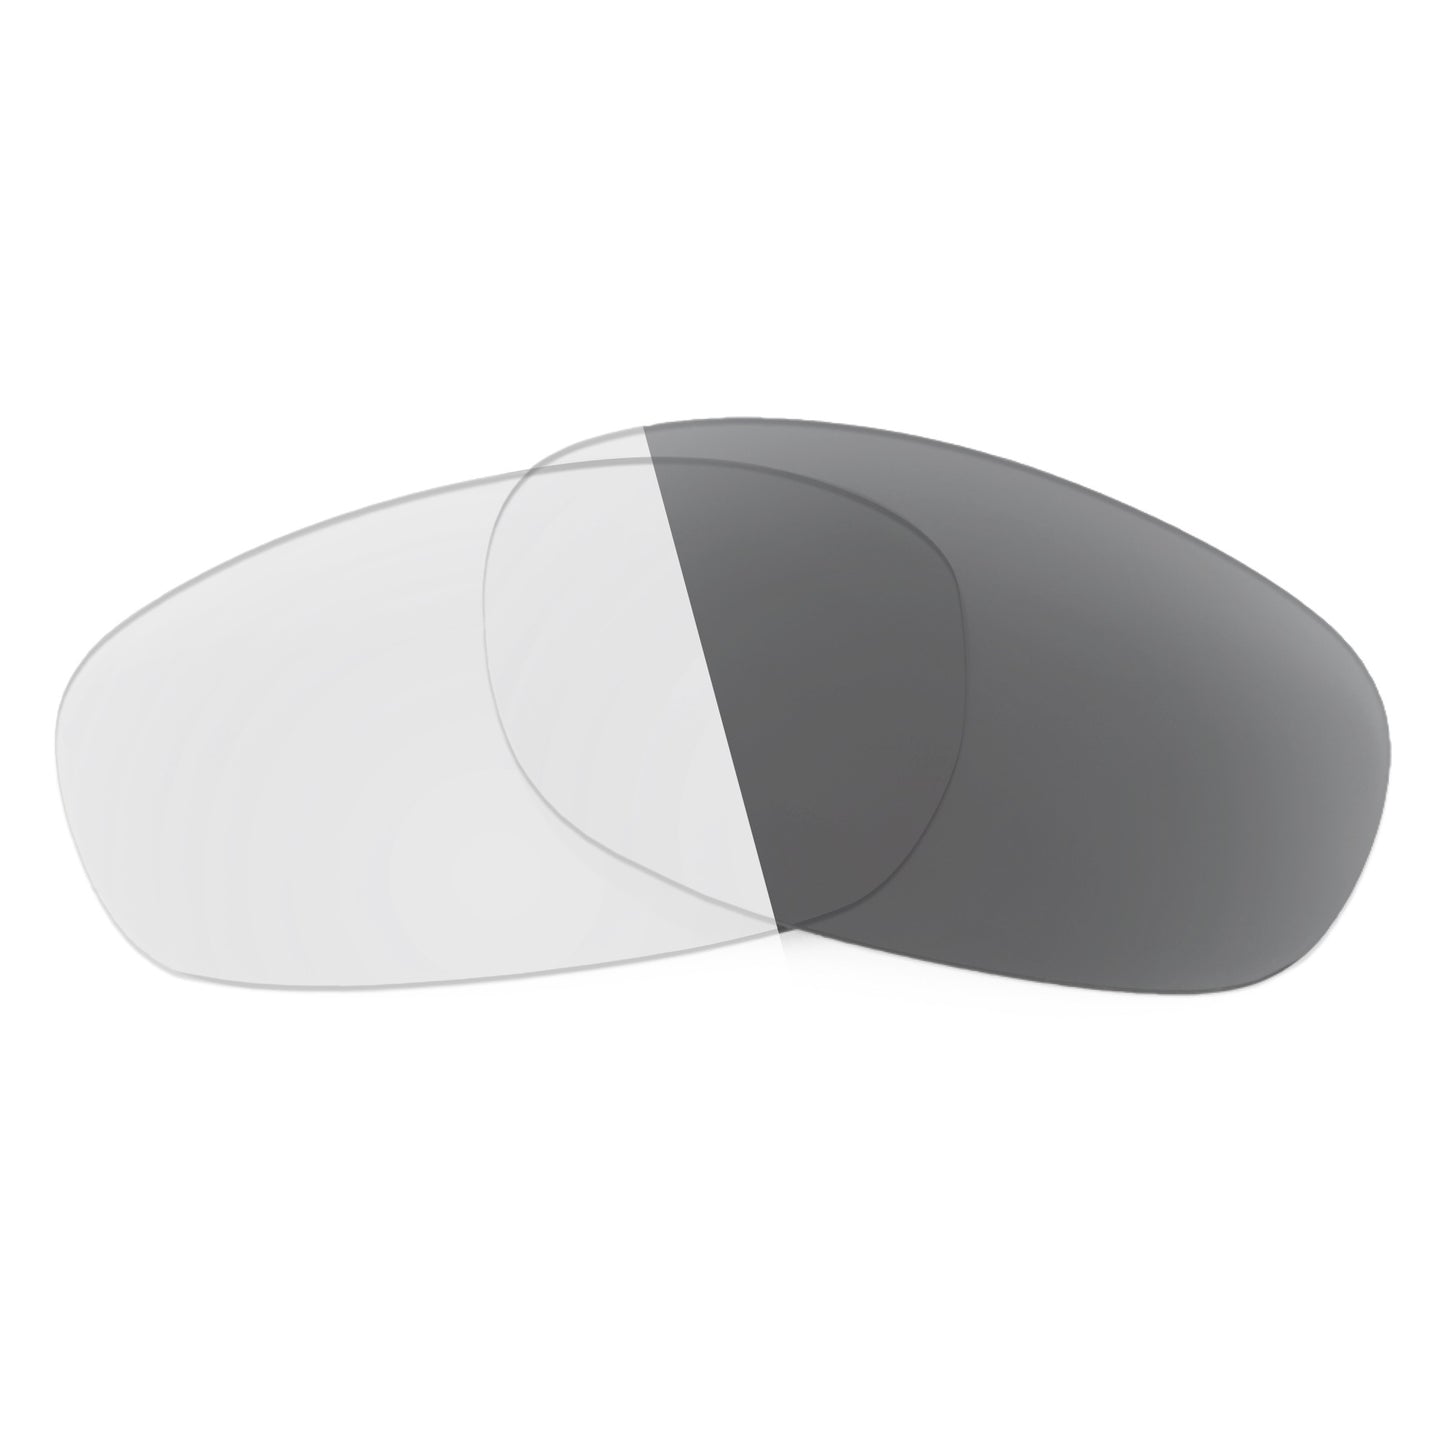 Revant replacement lenses for Ray-Ban RB3668 55mm Non-Polarized Adapt Gray Photochromic